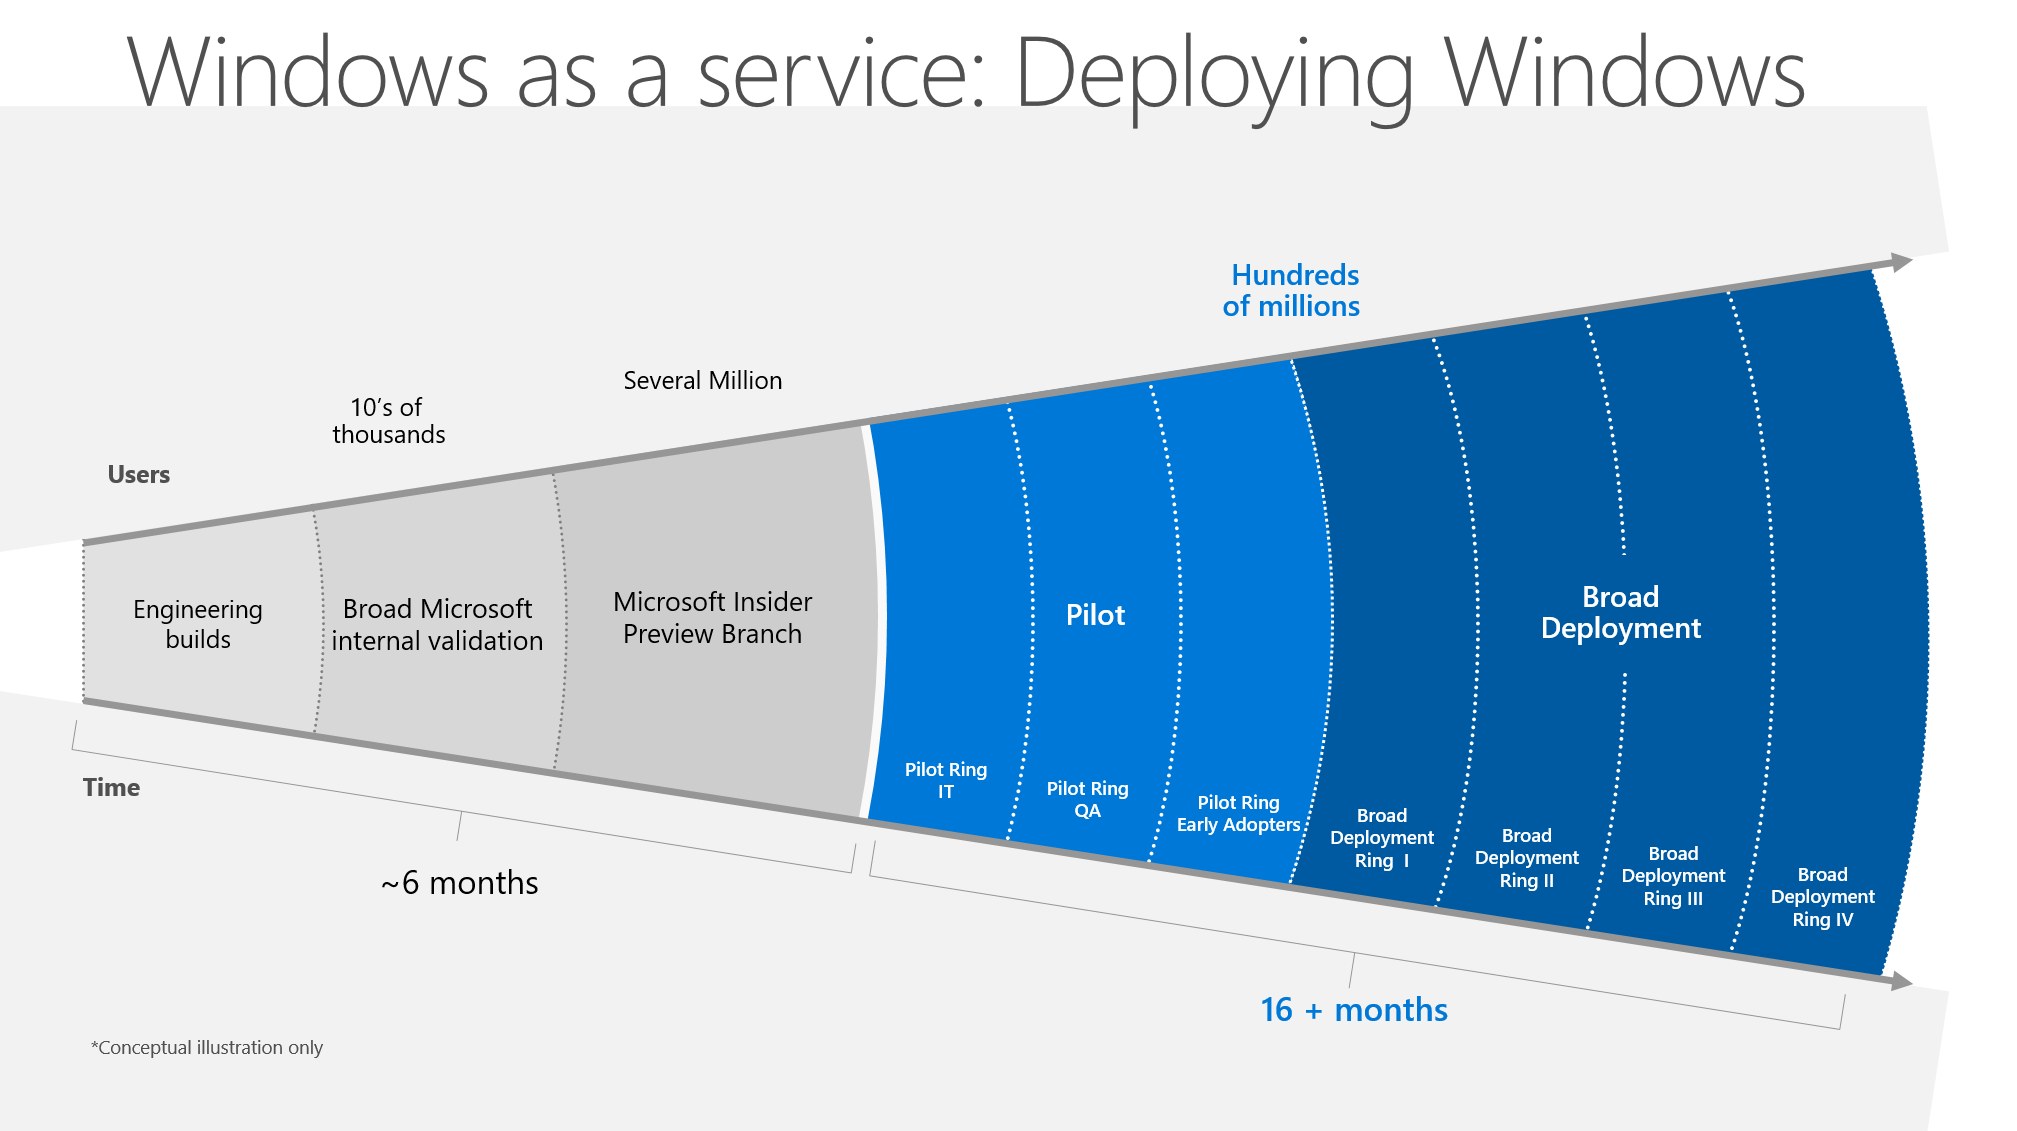 Windows-as-a-service-deployment-rings-image-1